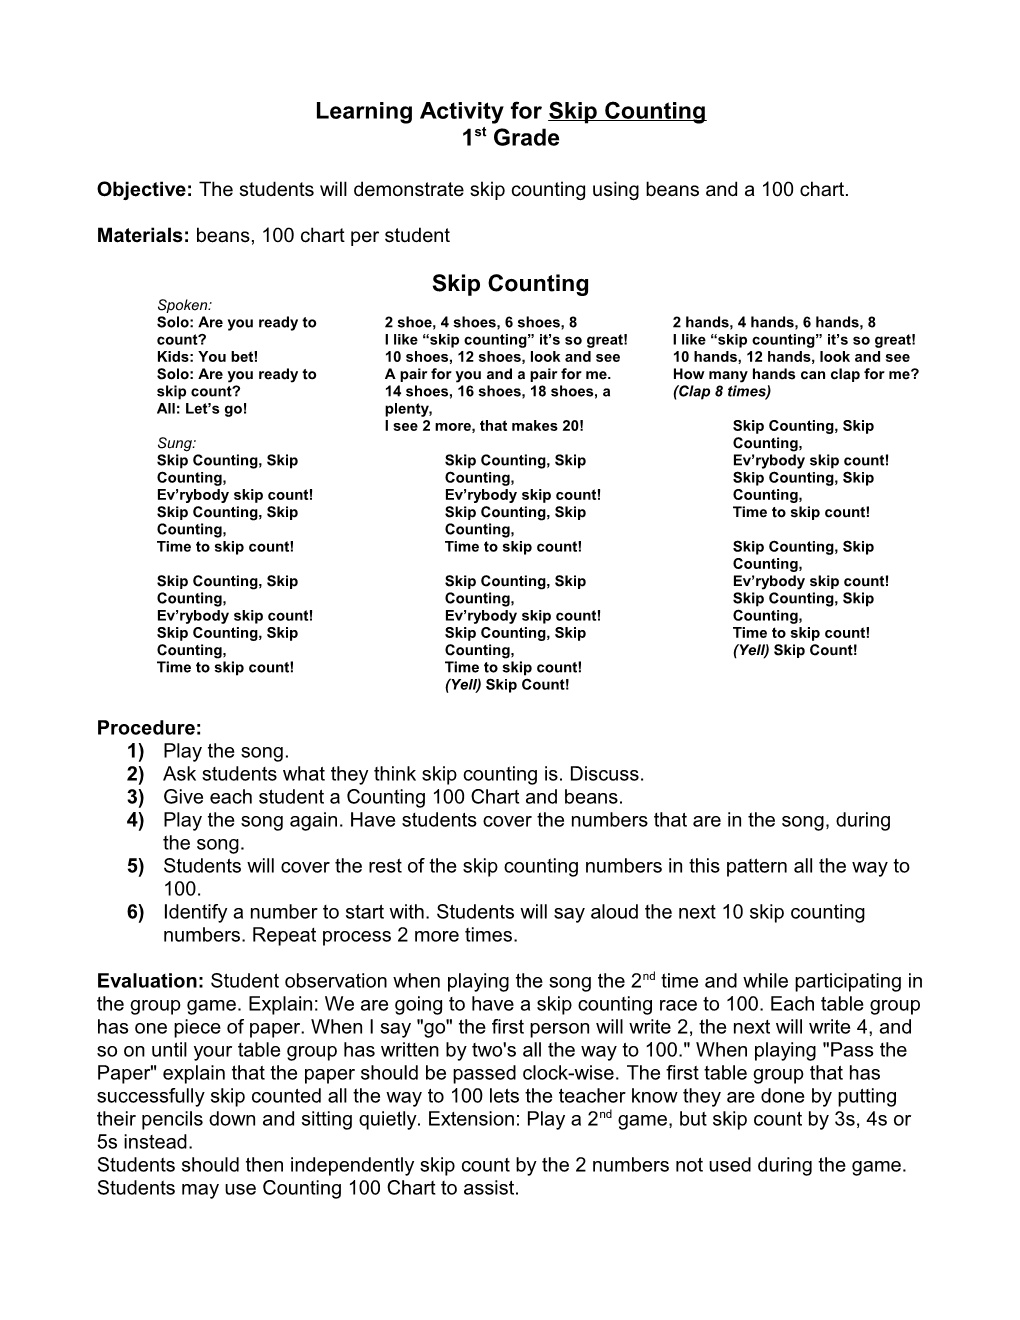 Learning Activity for (Song Title)